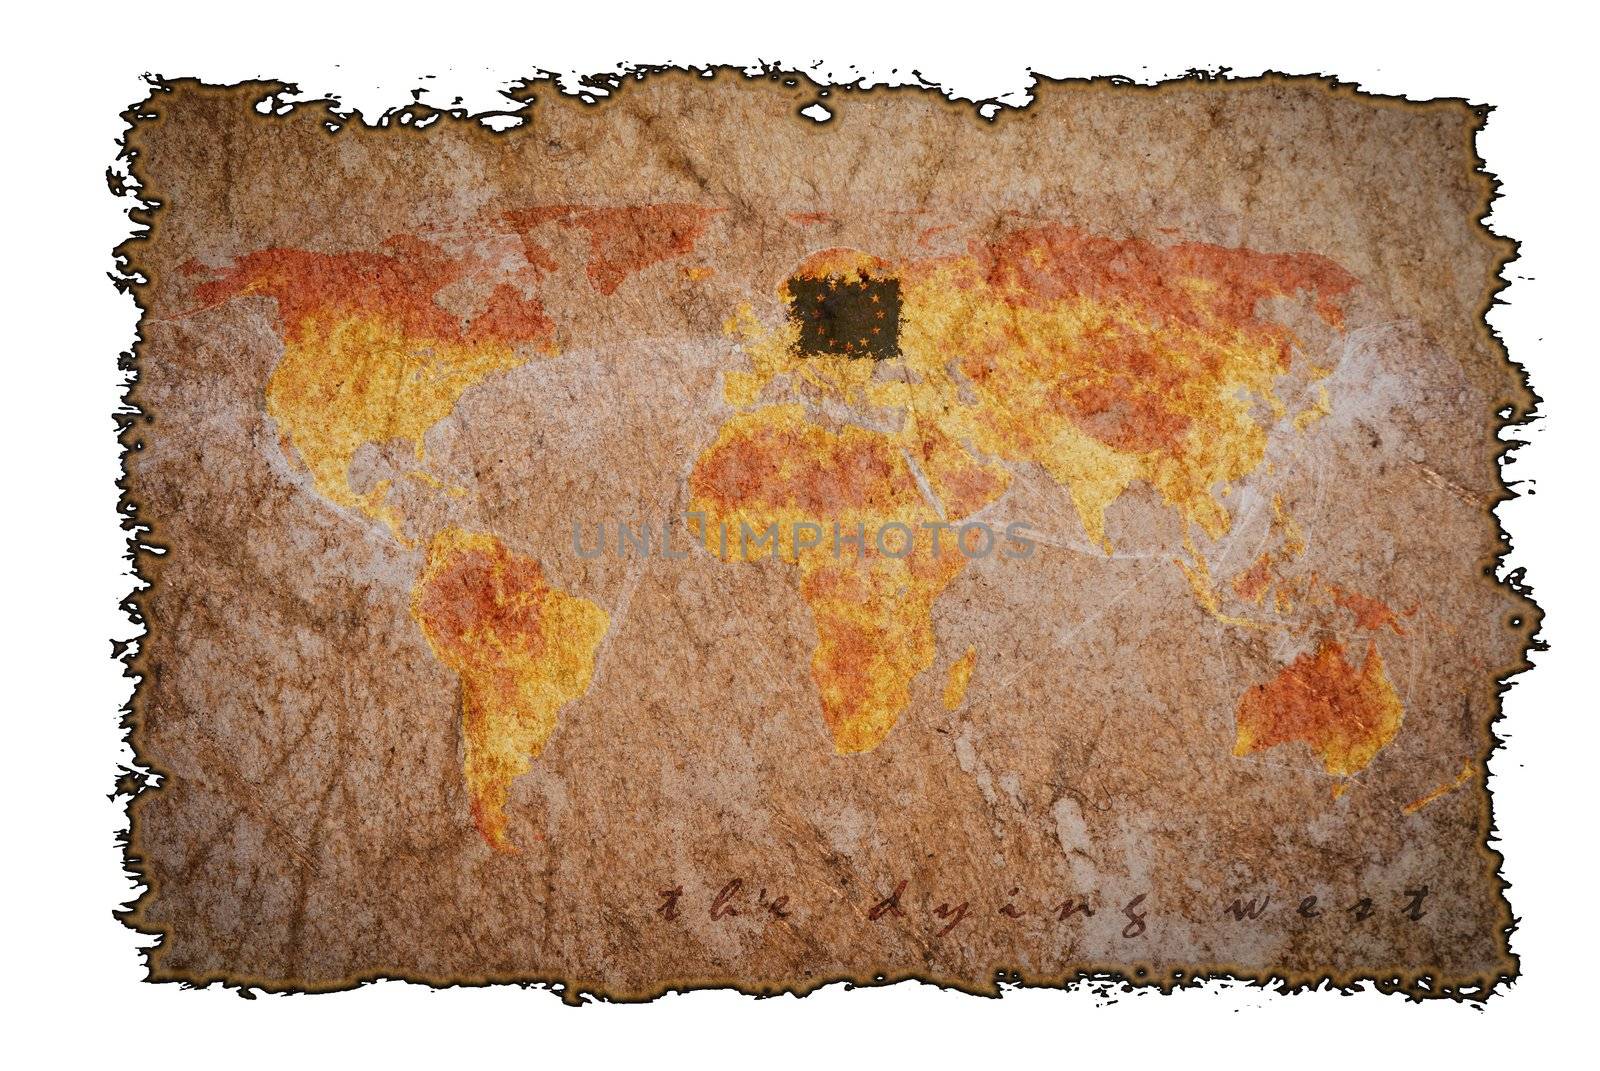 Old vintage map on burned paper background, can be use for various vintage concepts and world business concepts.